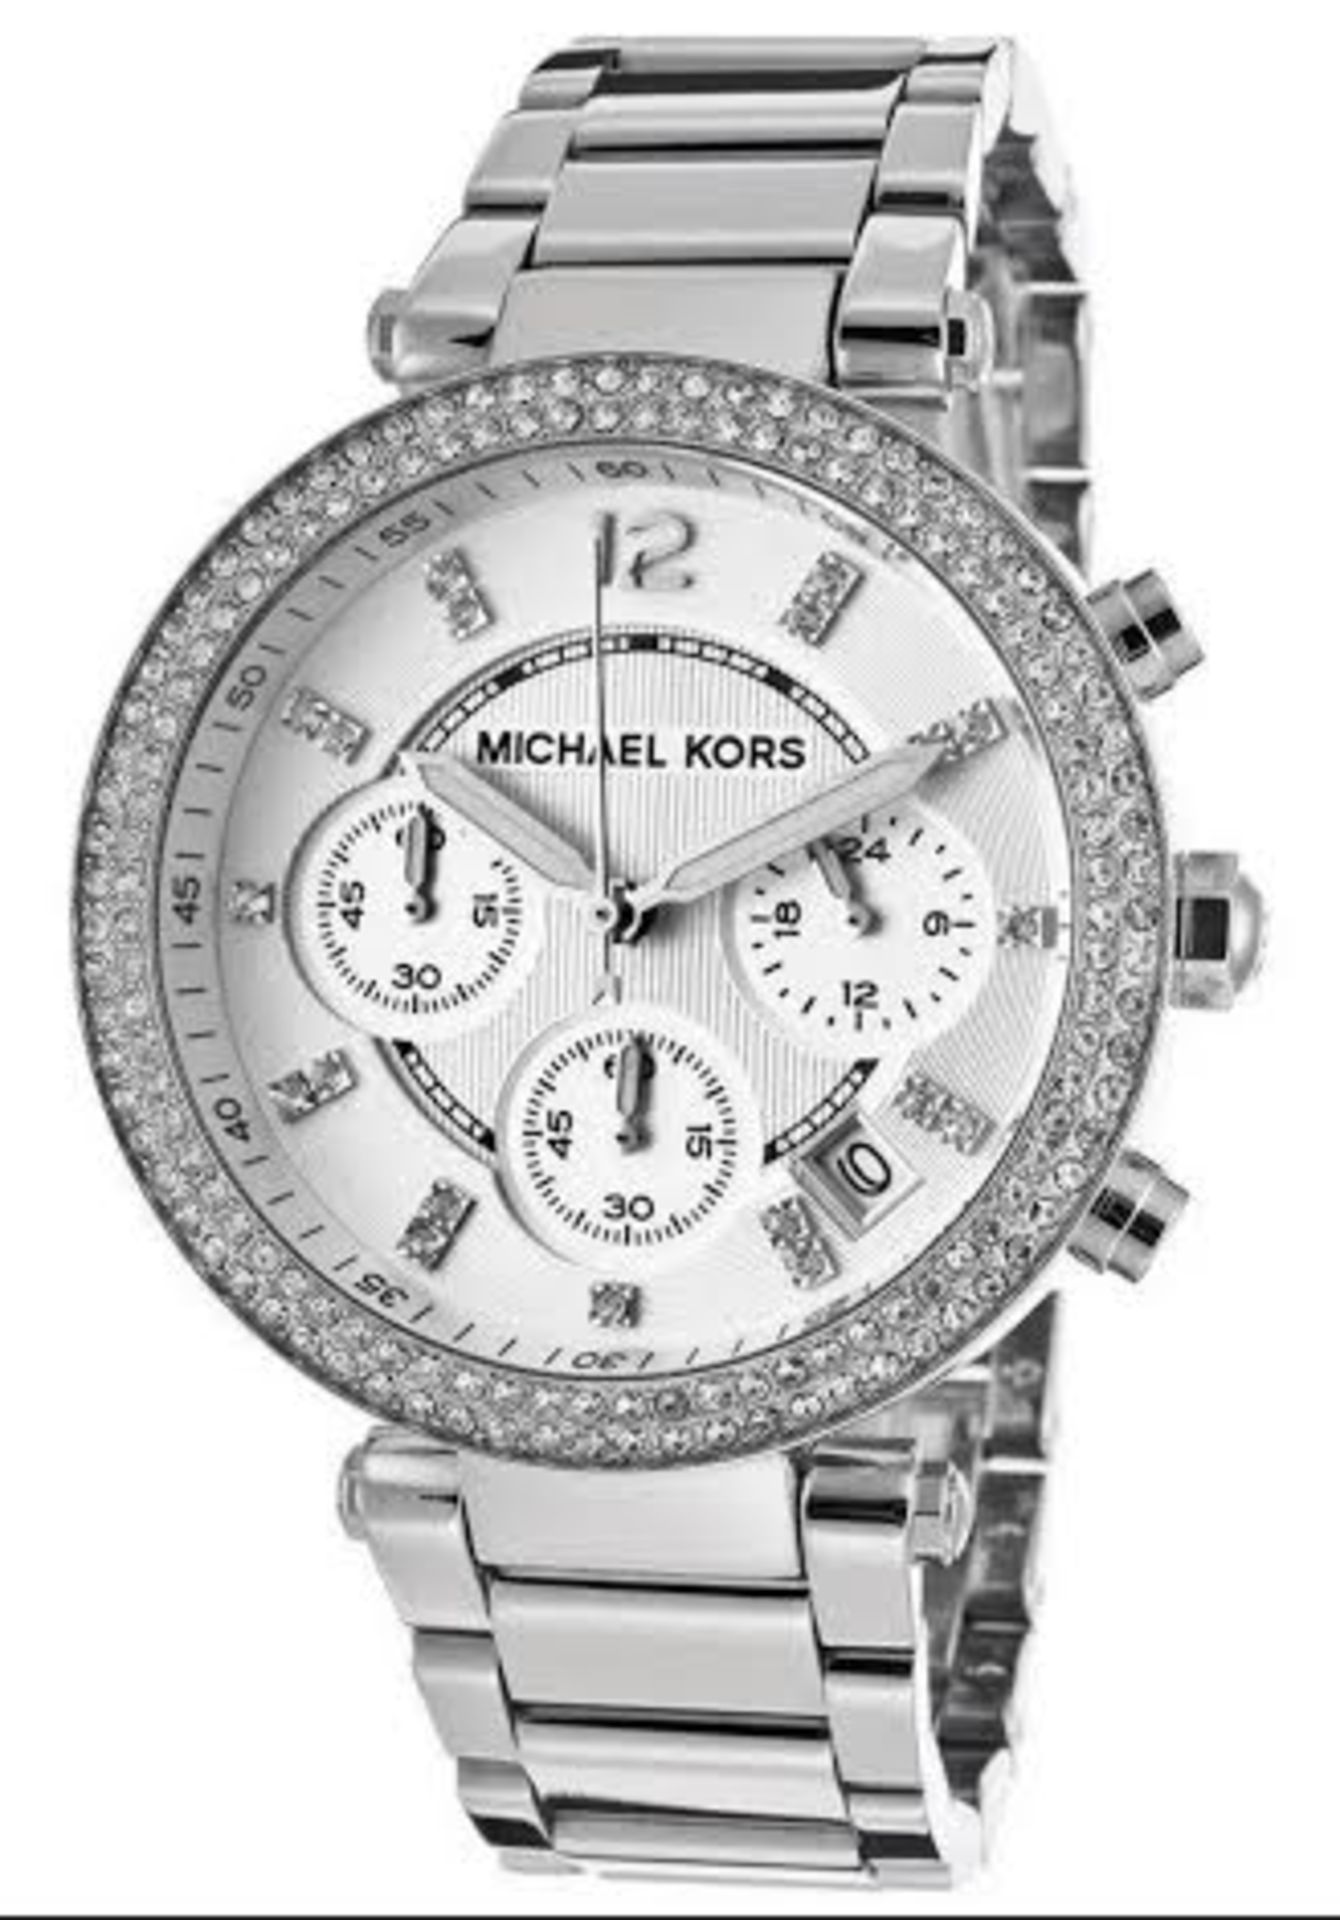 BRAND NEW LADIES MICHAEL KORS MK5353, COMPLETE WITH ORIGINAL PACKAGING AND MANUAL